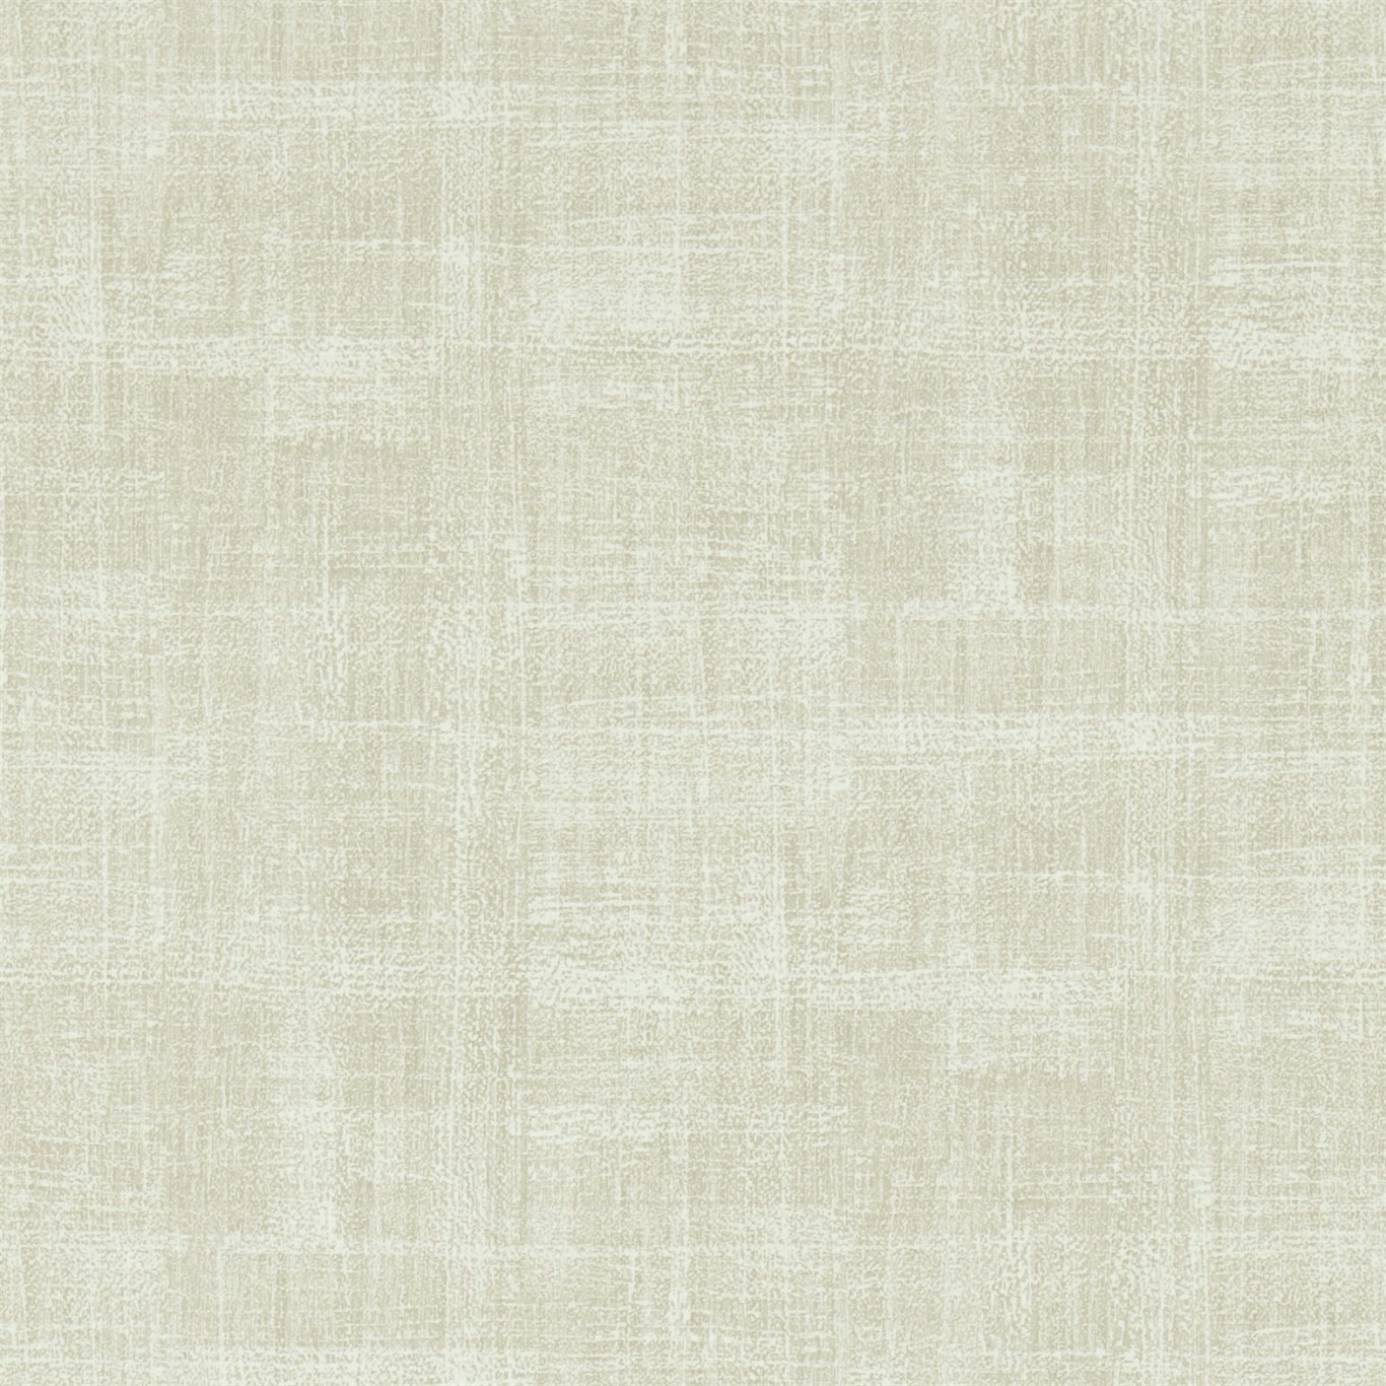 Curtains in Sanderson Home Washi Fabric Product Code: 223602